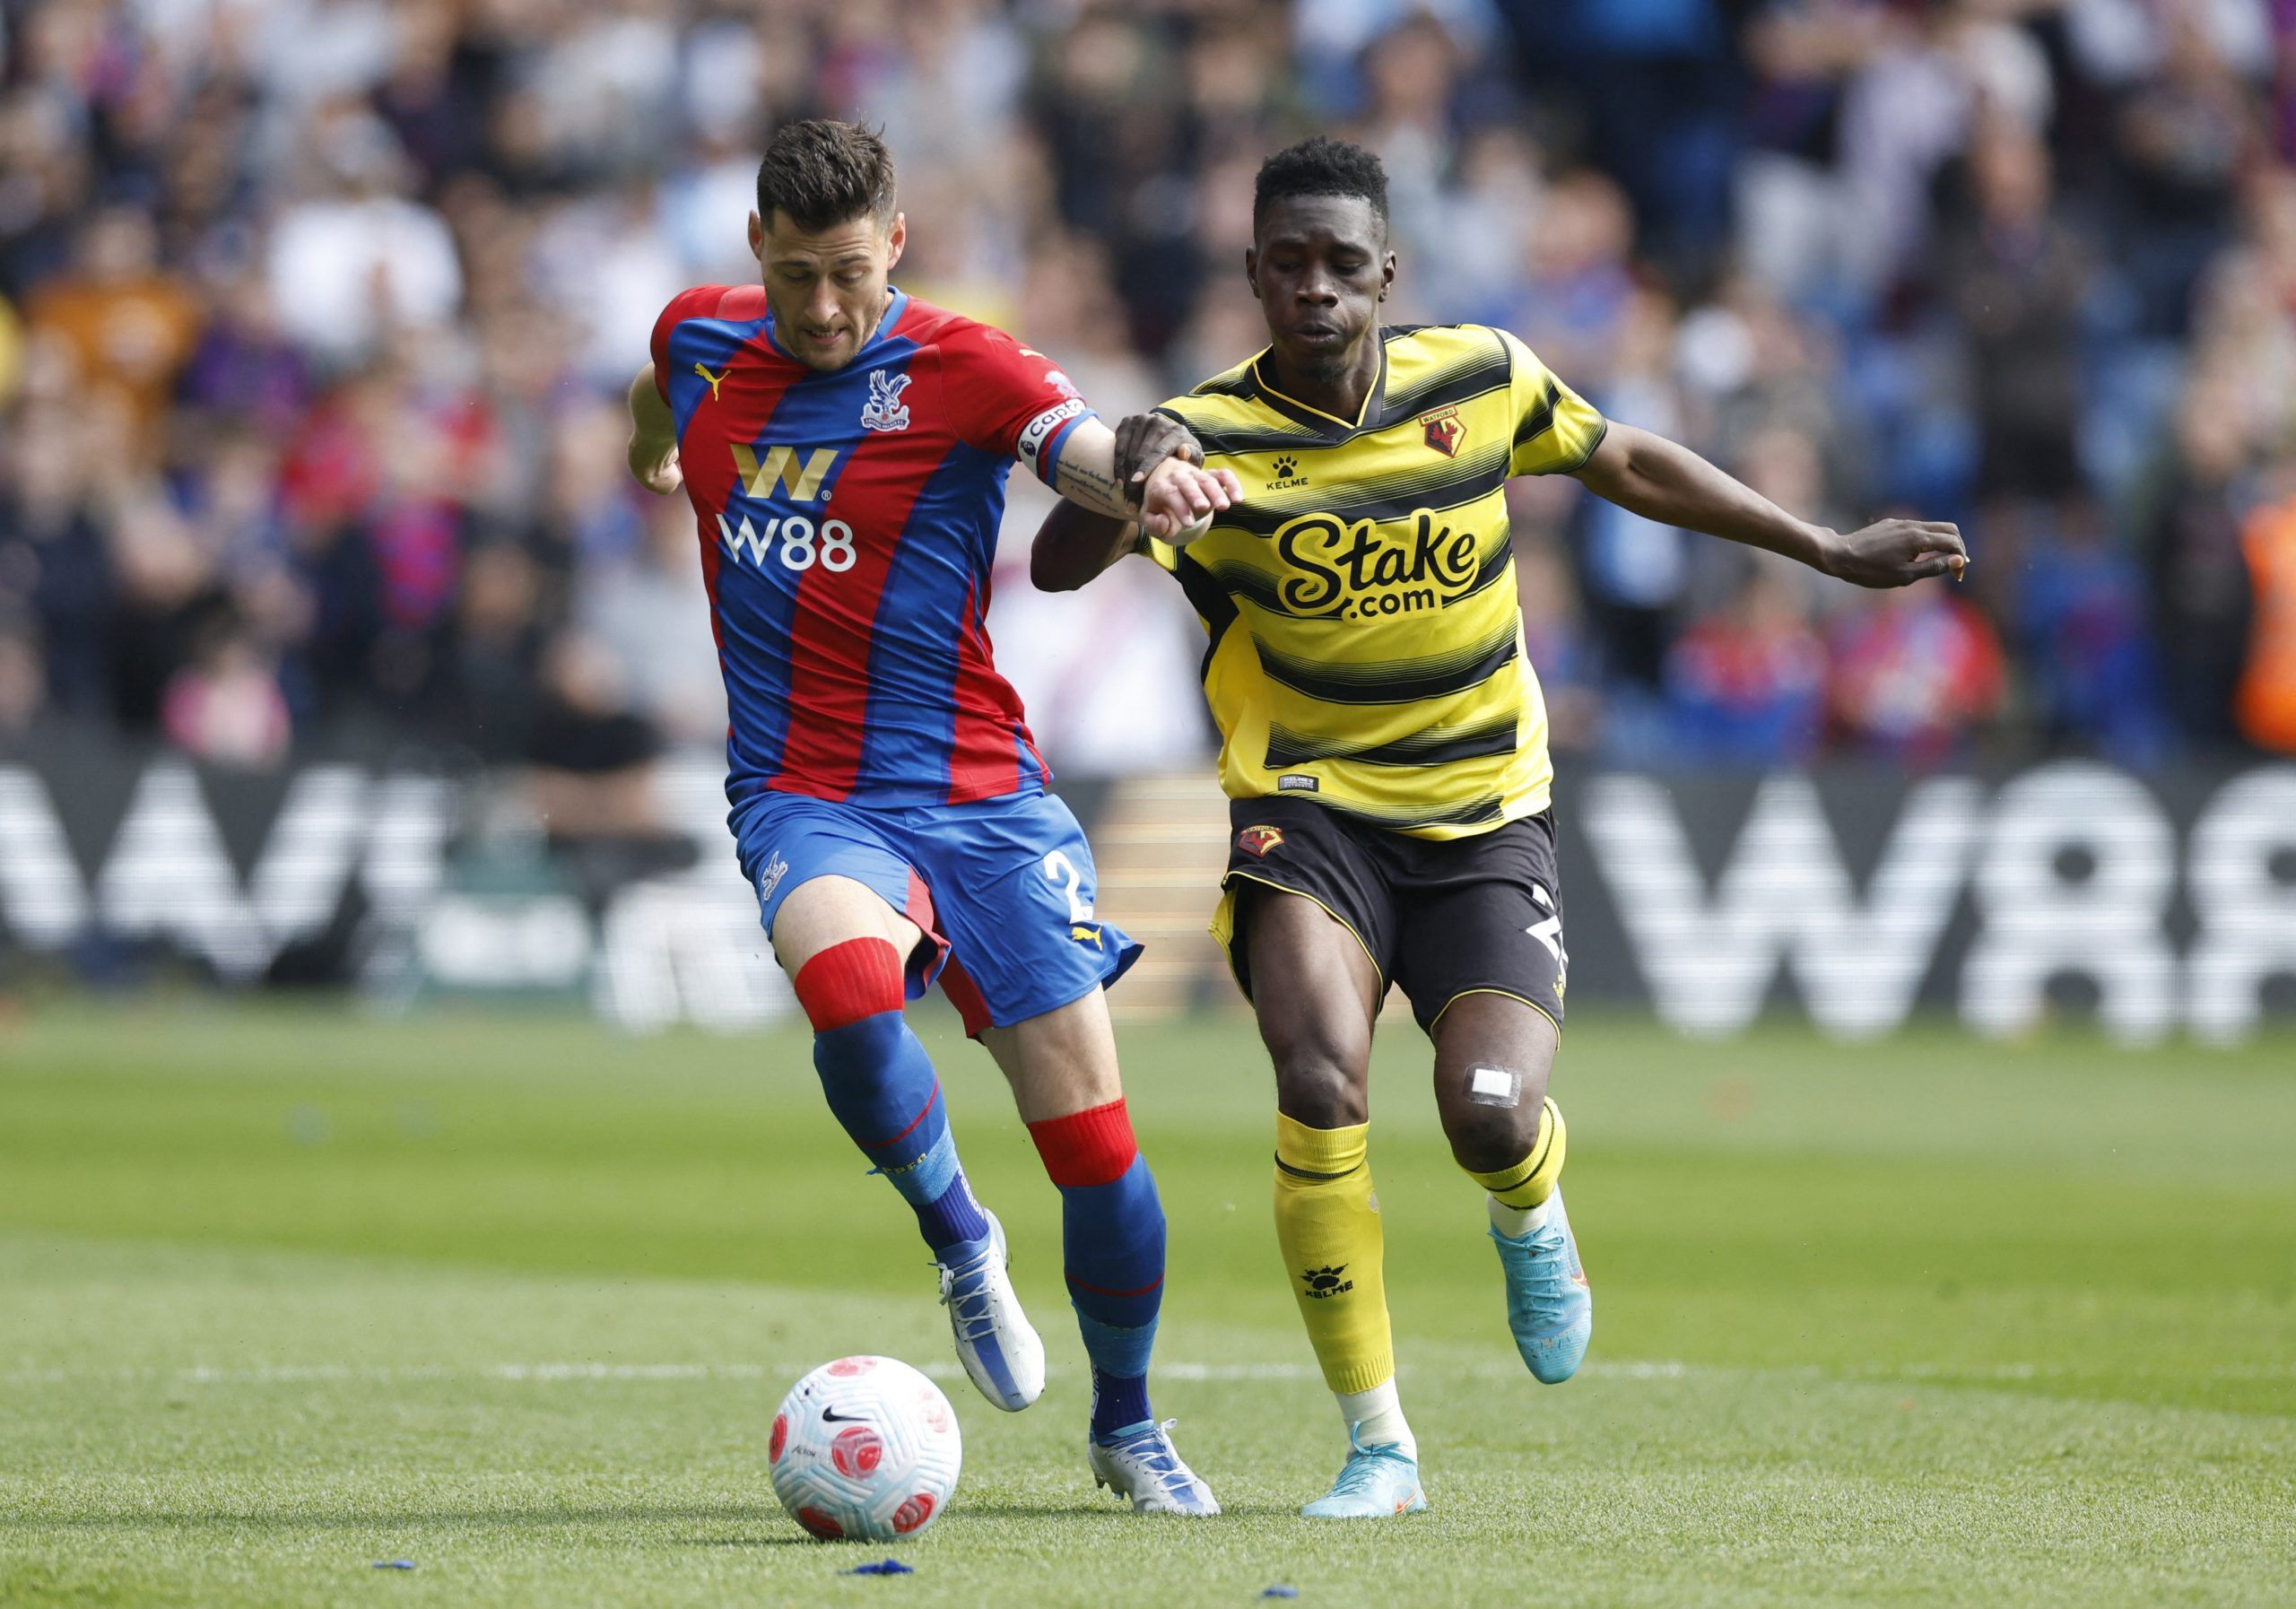 Soccer Football - Premier League - Crystal Palace v Watford - Selhurst Park, London, Britain - May 7, 2022 Crystal Palace's Joel Ward in action with Watford's Ismaila Sarr Action Images via Reuters/Peter Cziborra EDITORIAL USE ONLY. No use with unauthorized audio, video, data, fixture lists, club/league logos or 'live' services. Online in-match use limited to 75 images, no video emulation. No use in betting, games or single club /league/player publications.  Please contact your account represent